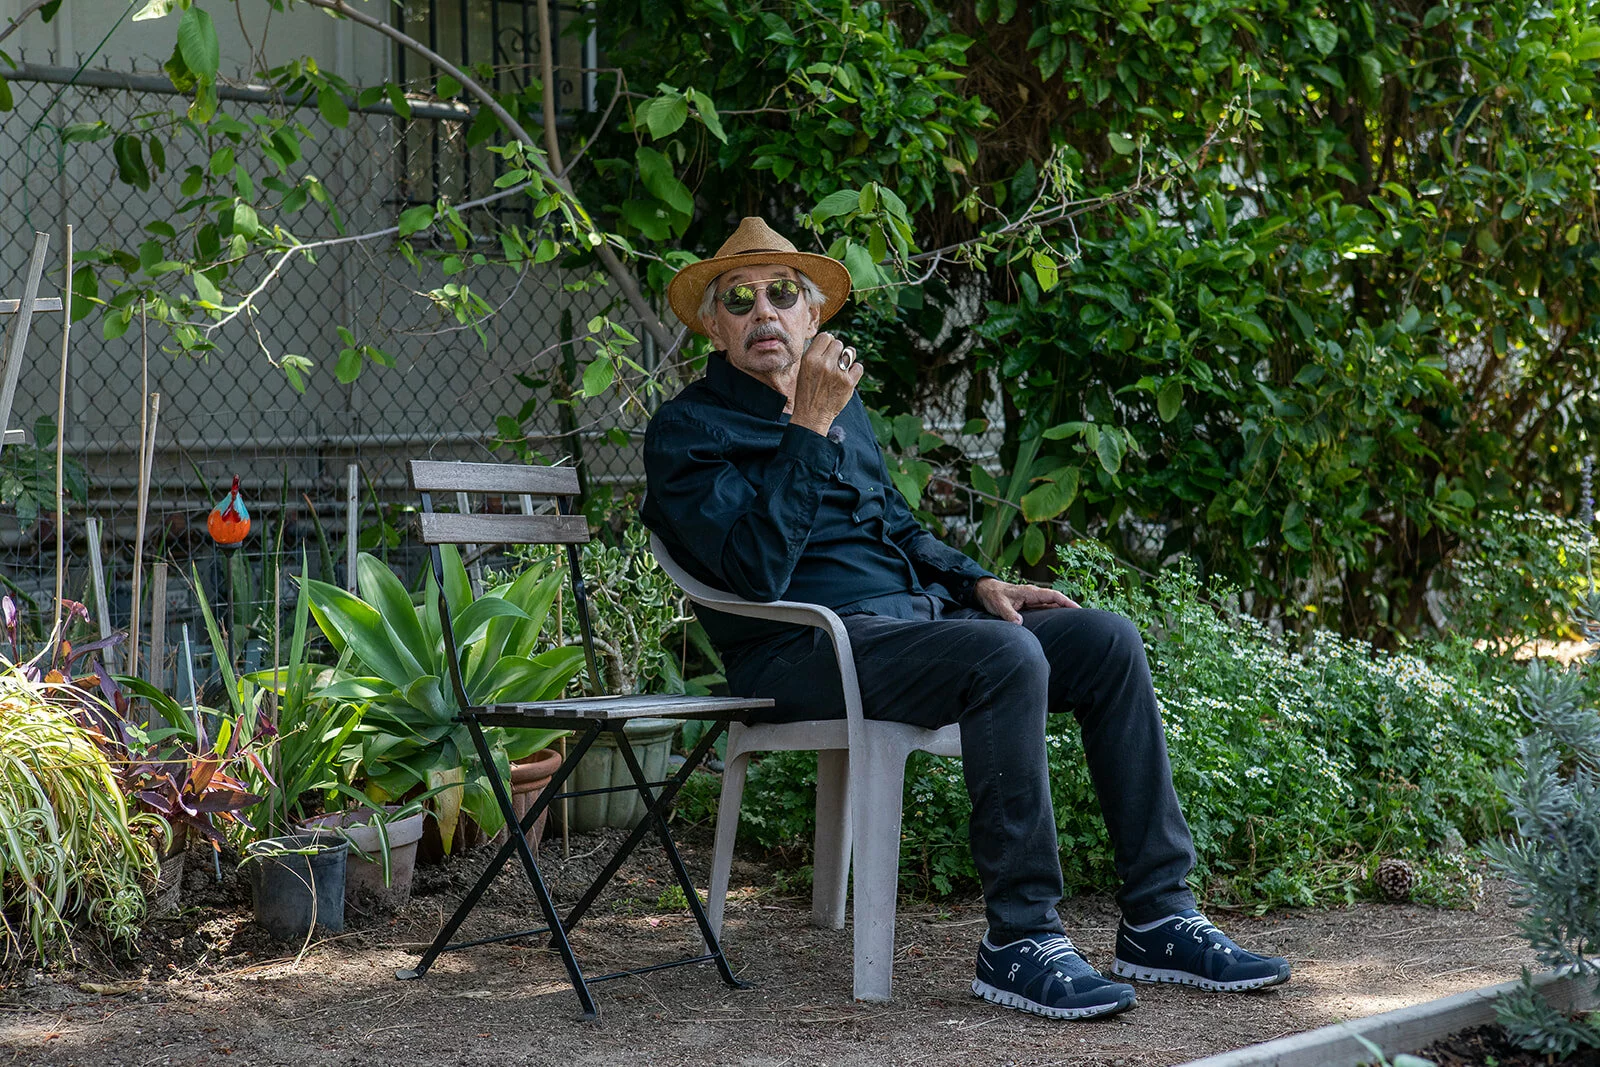 Artist David Lamelas sits on a plastic chair surrounded by green foliage.